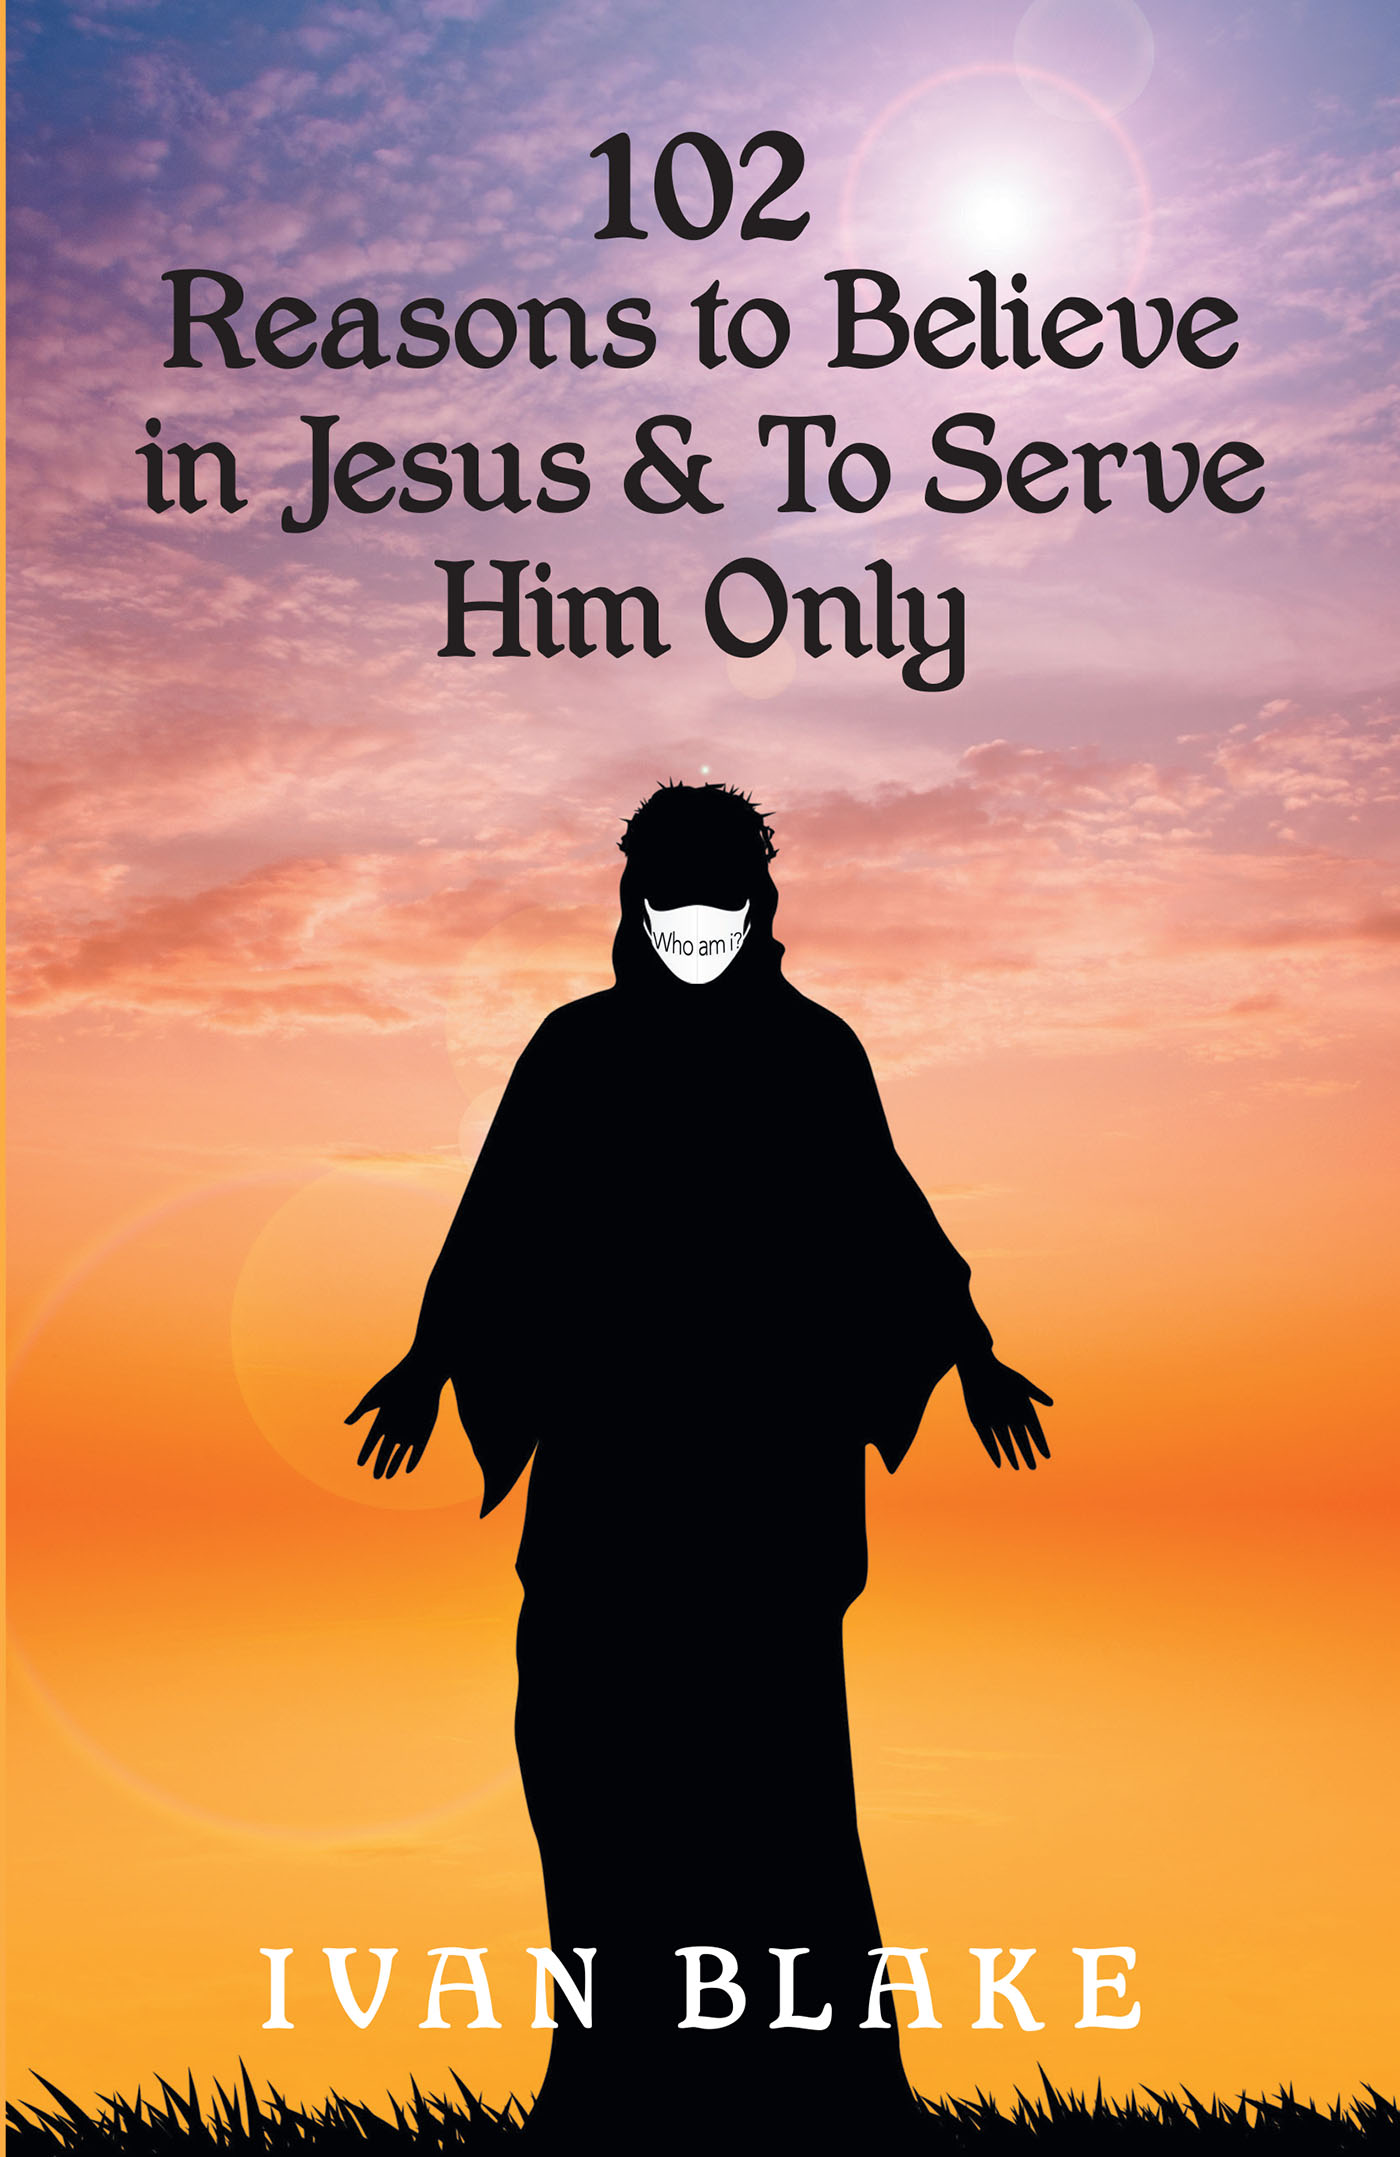 Ivan Blake’s Newly Released “102 Reasons to Believe in Jesus and To Serve Him Only” is a Unique Resource for Spiritual Encouragement